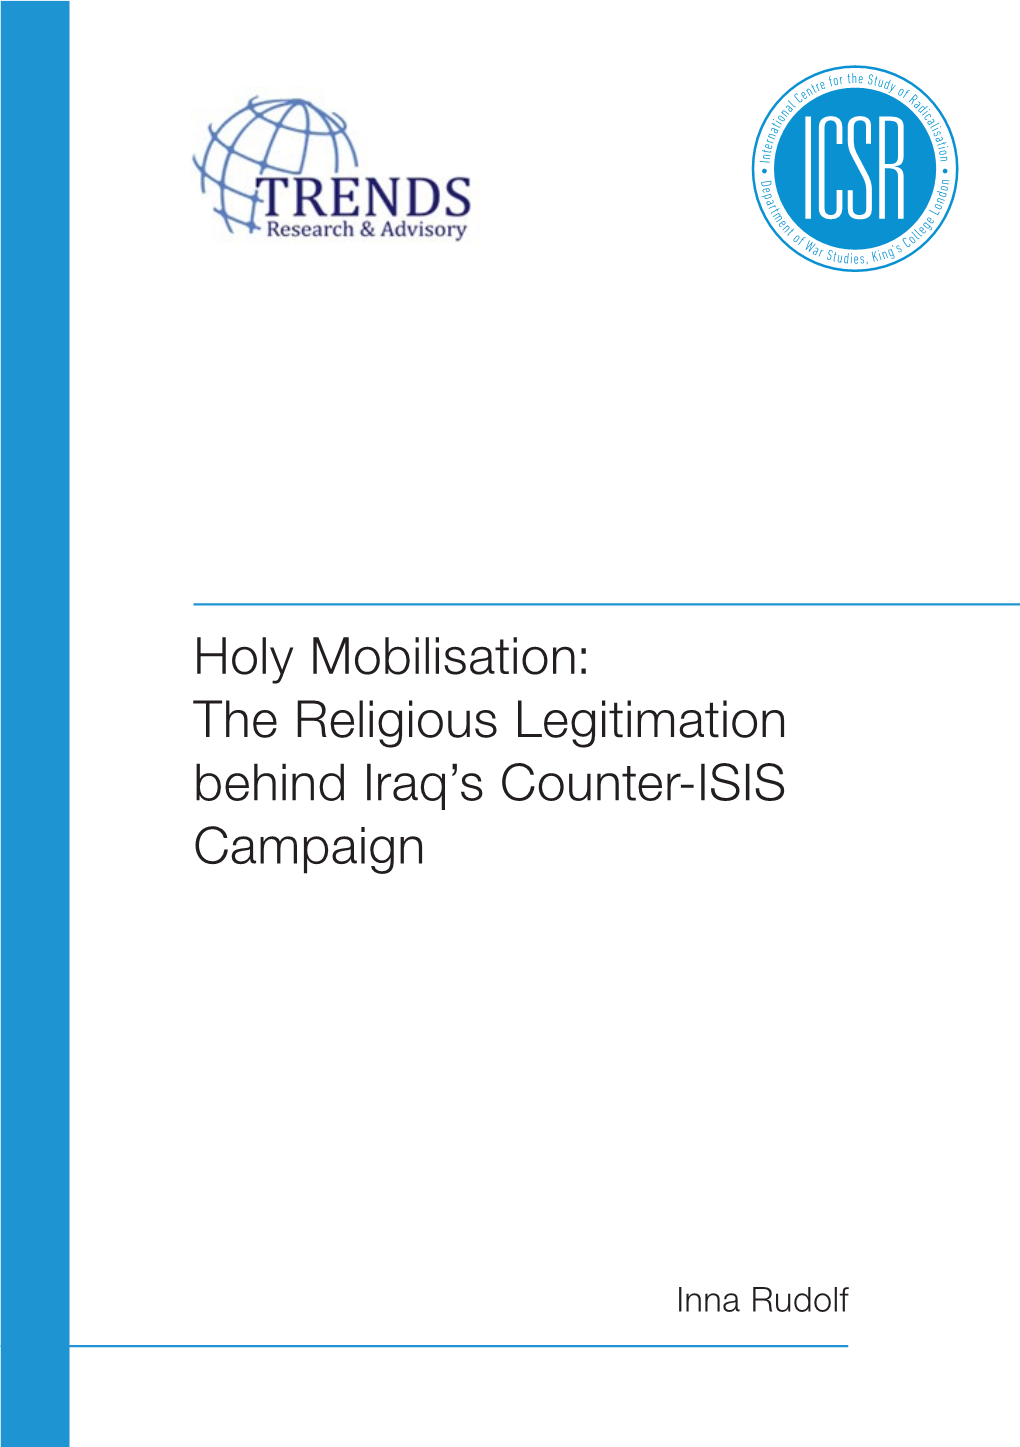 Holy Mobilisation: the Religious Legitimation Behind Iraq's Counter-ISIS Campaign